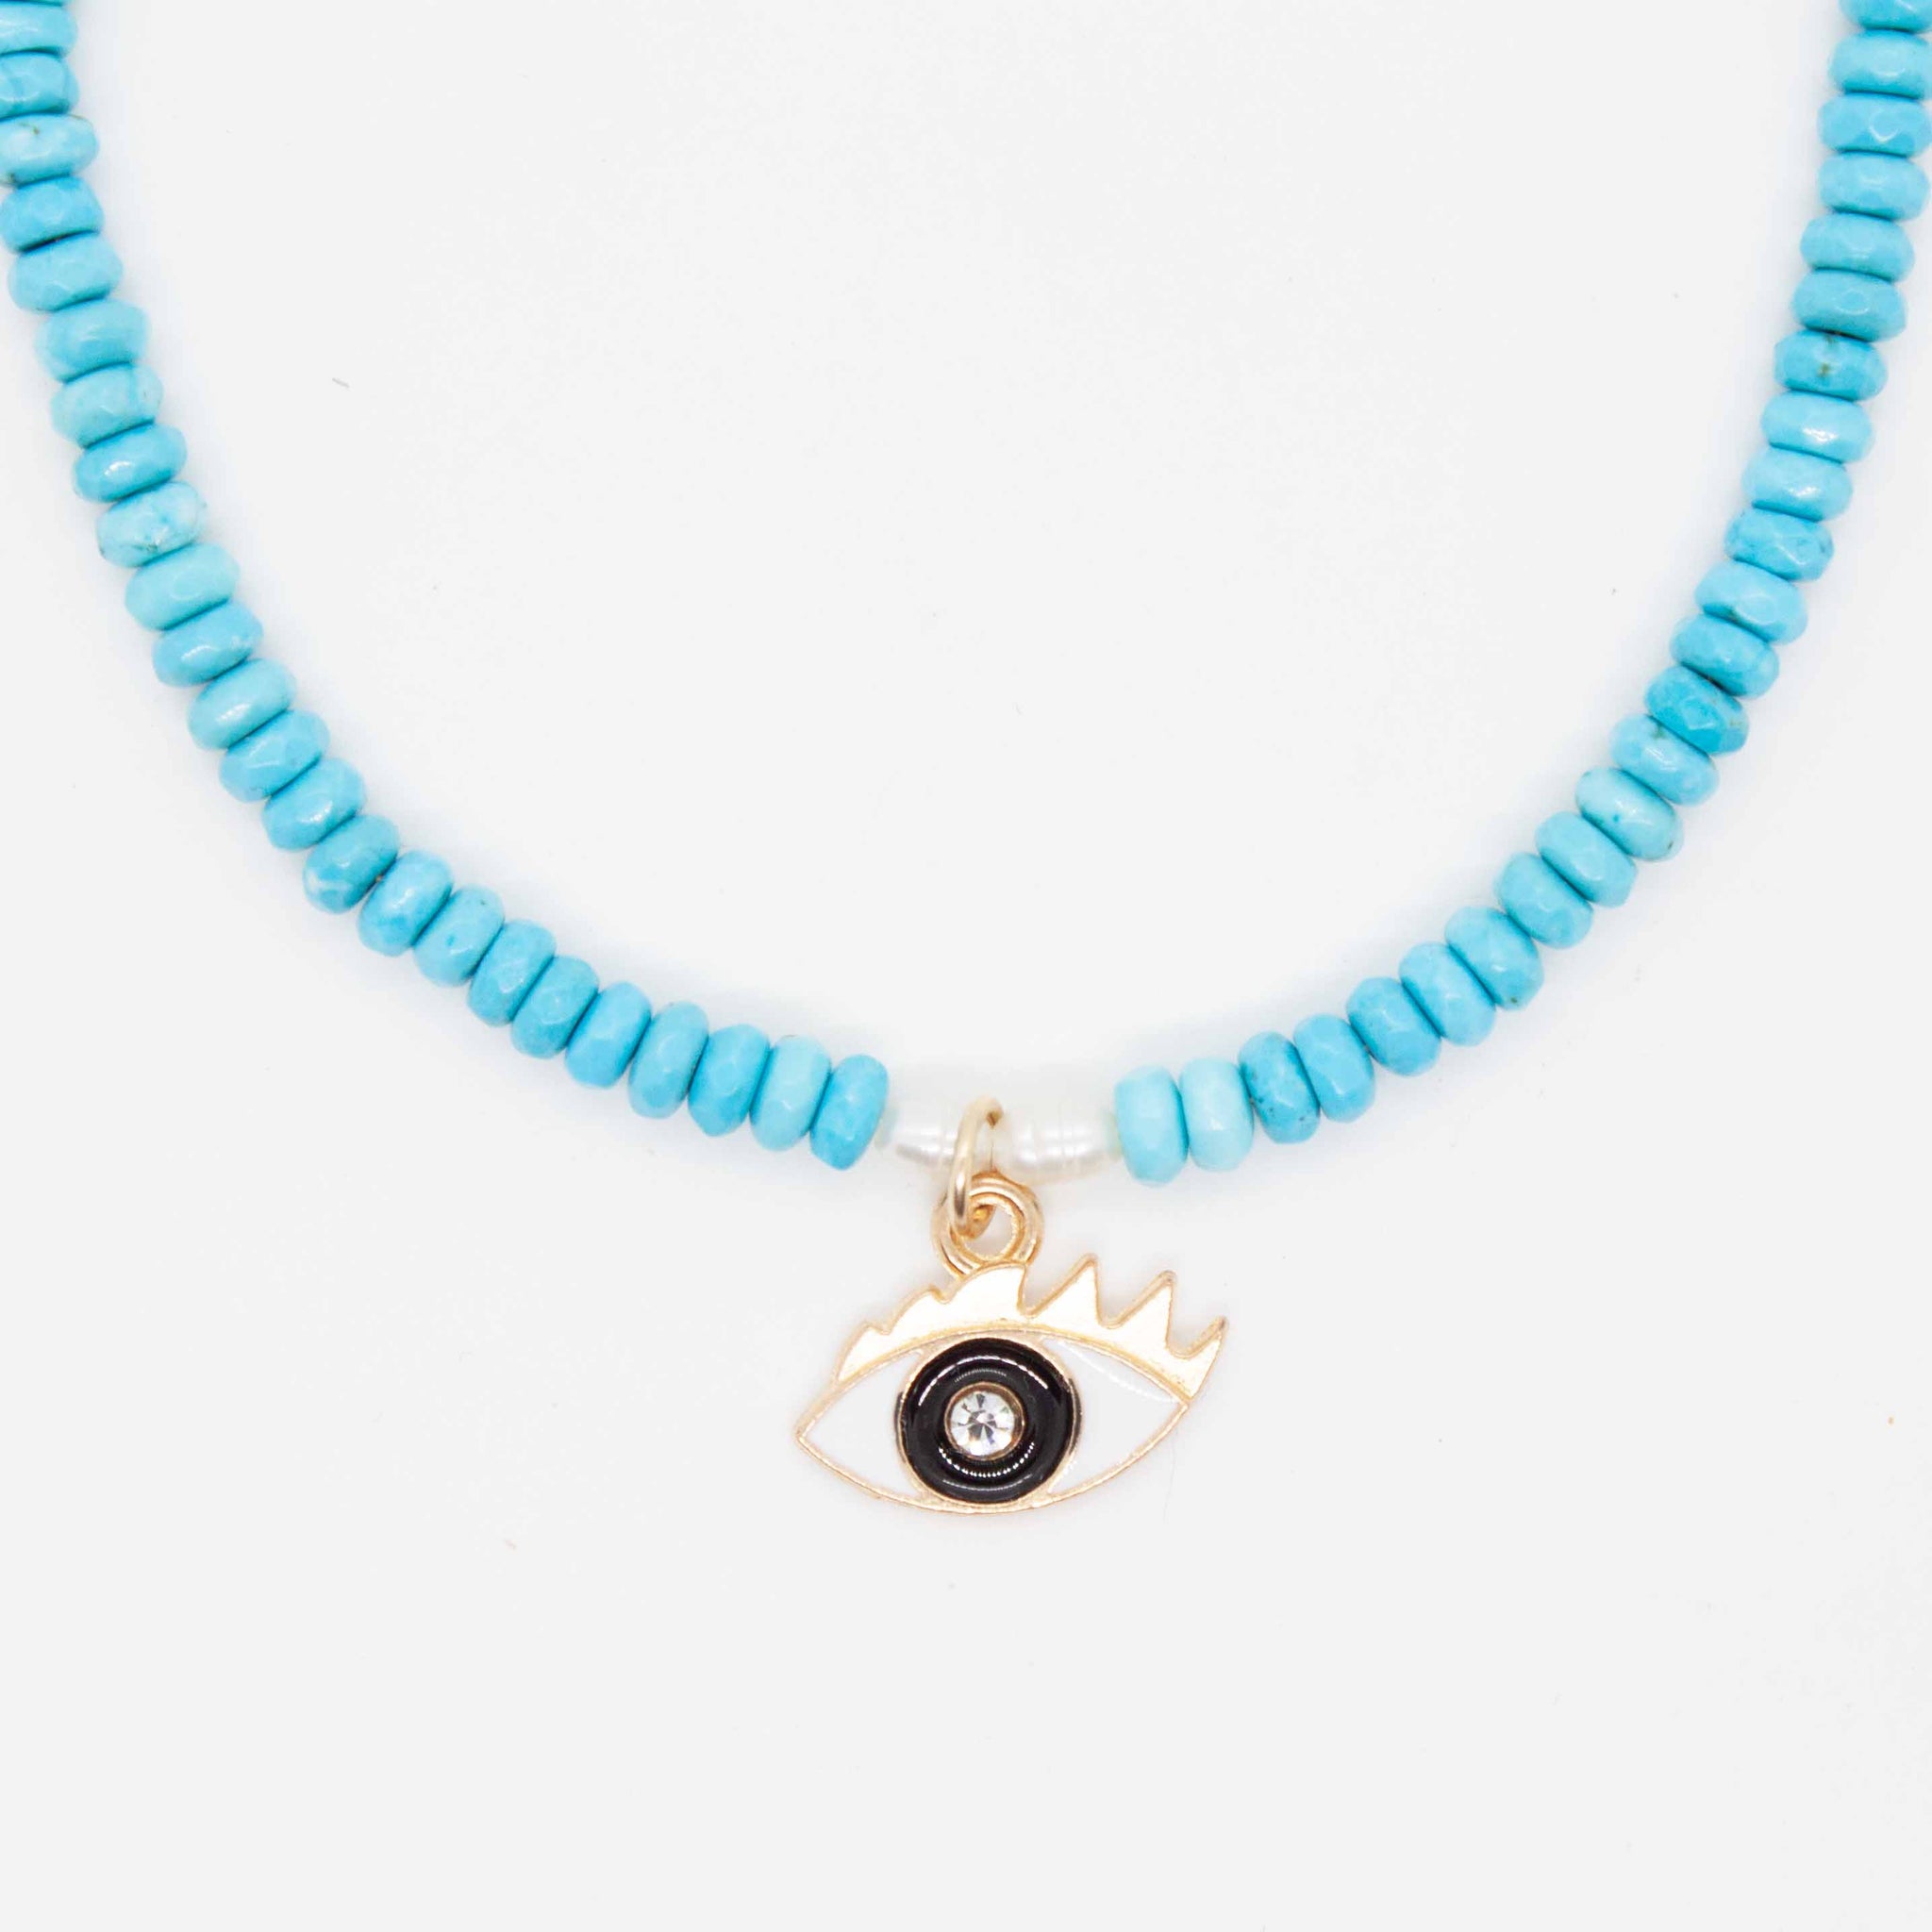 A universal symbol of protection, the evil eye talisman dates back to ancient Greece. This charm is paired with bright turquoise beads and freshwater pearls. 16" necklace beaded with synthetic, faceted turquoise beads and freshwater pearls enamel evil eye pendant with sparkly iris. Made in Toronto by kp jewelry co.